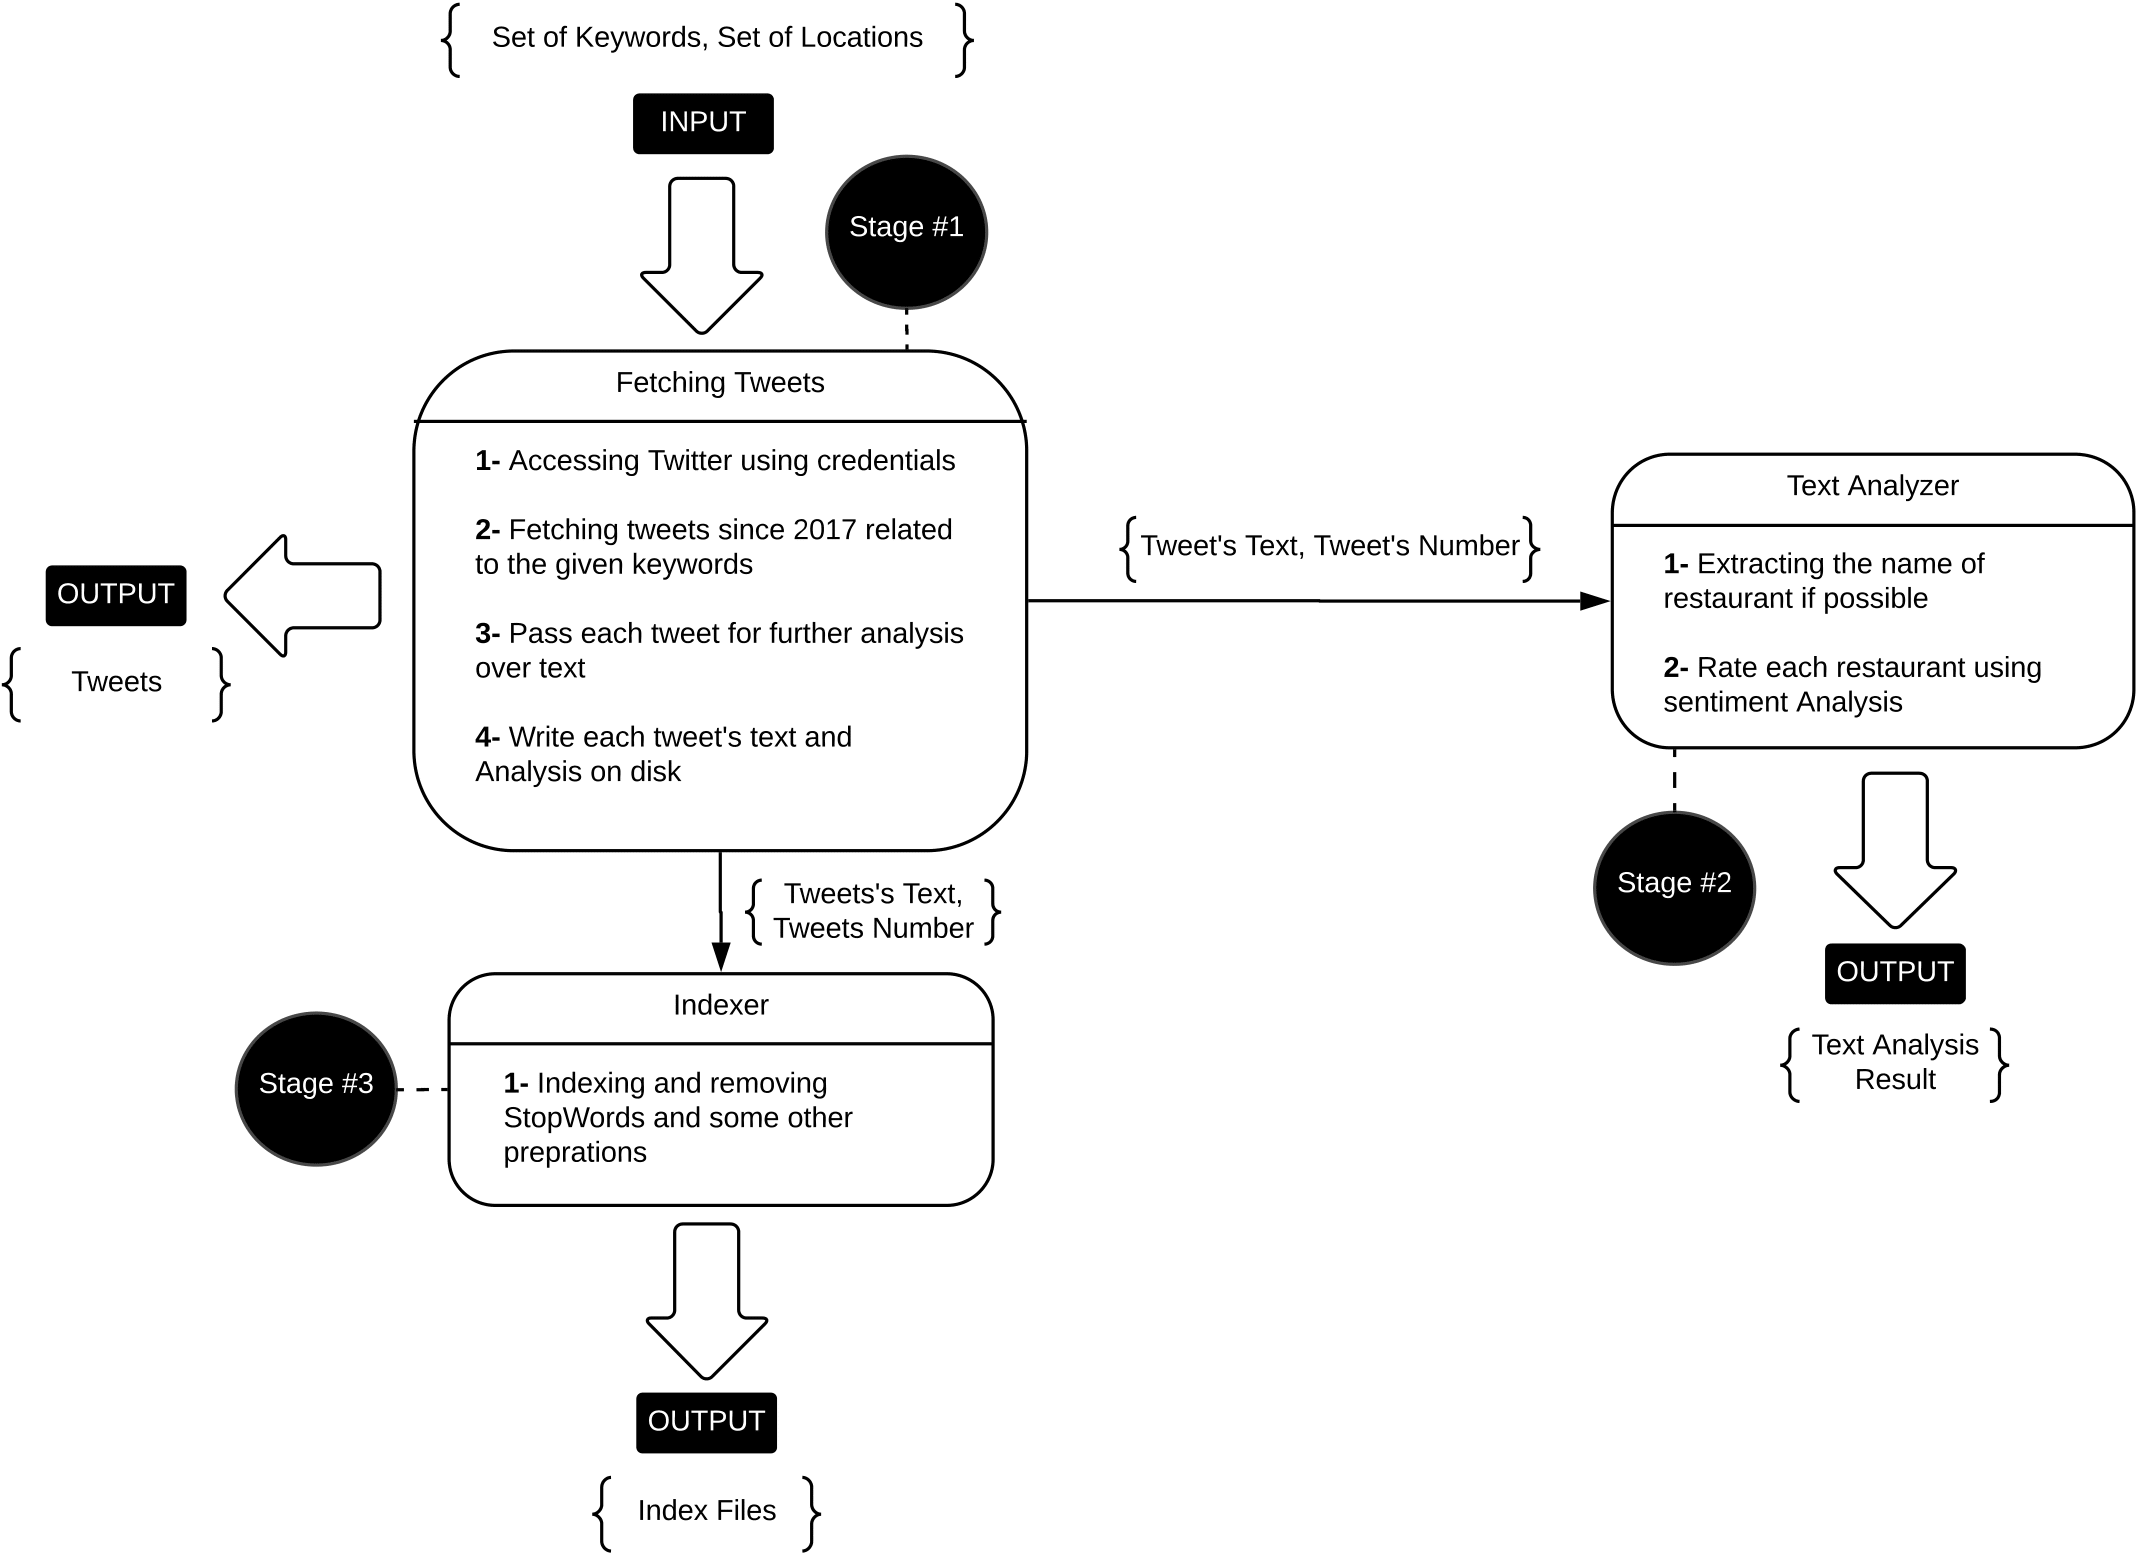 systemDiagram.png